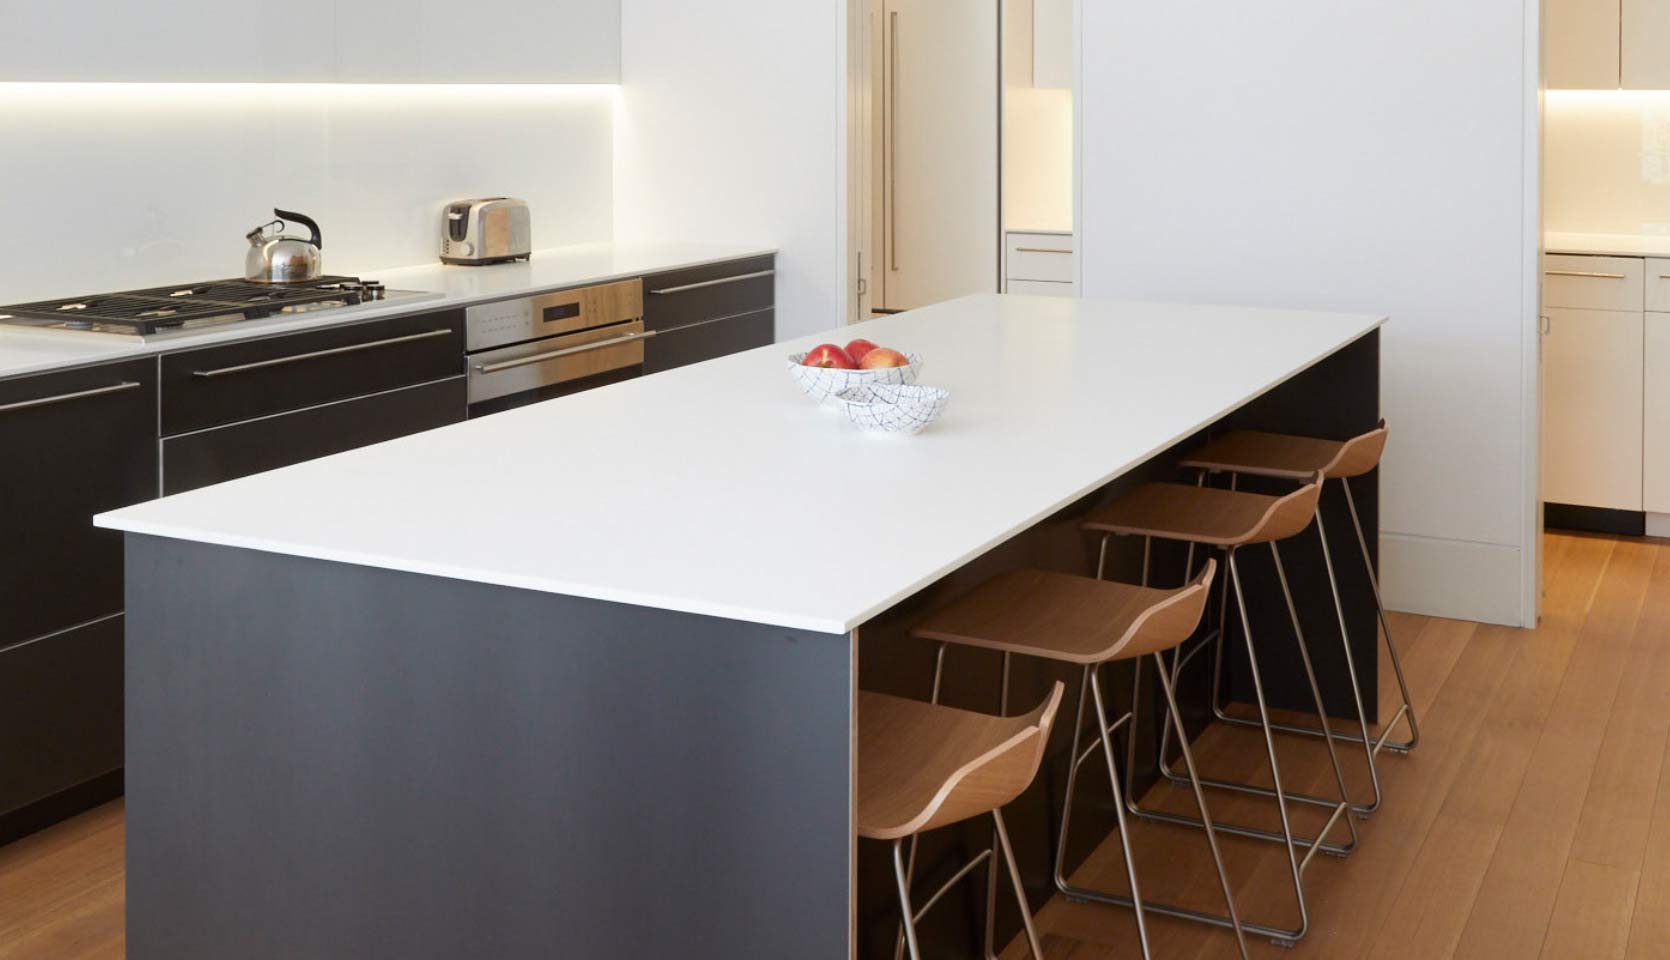 clean minimal luxury kitchen with white countertops and barstool chairs